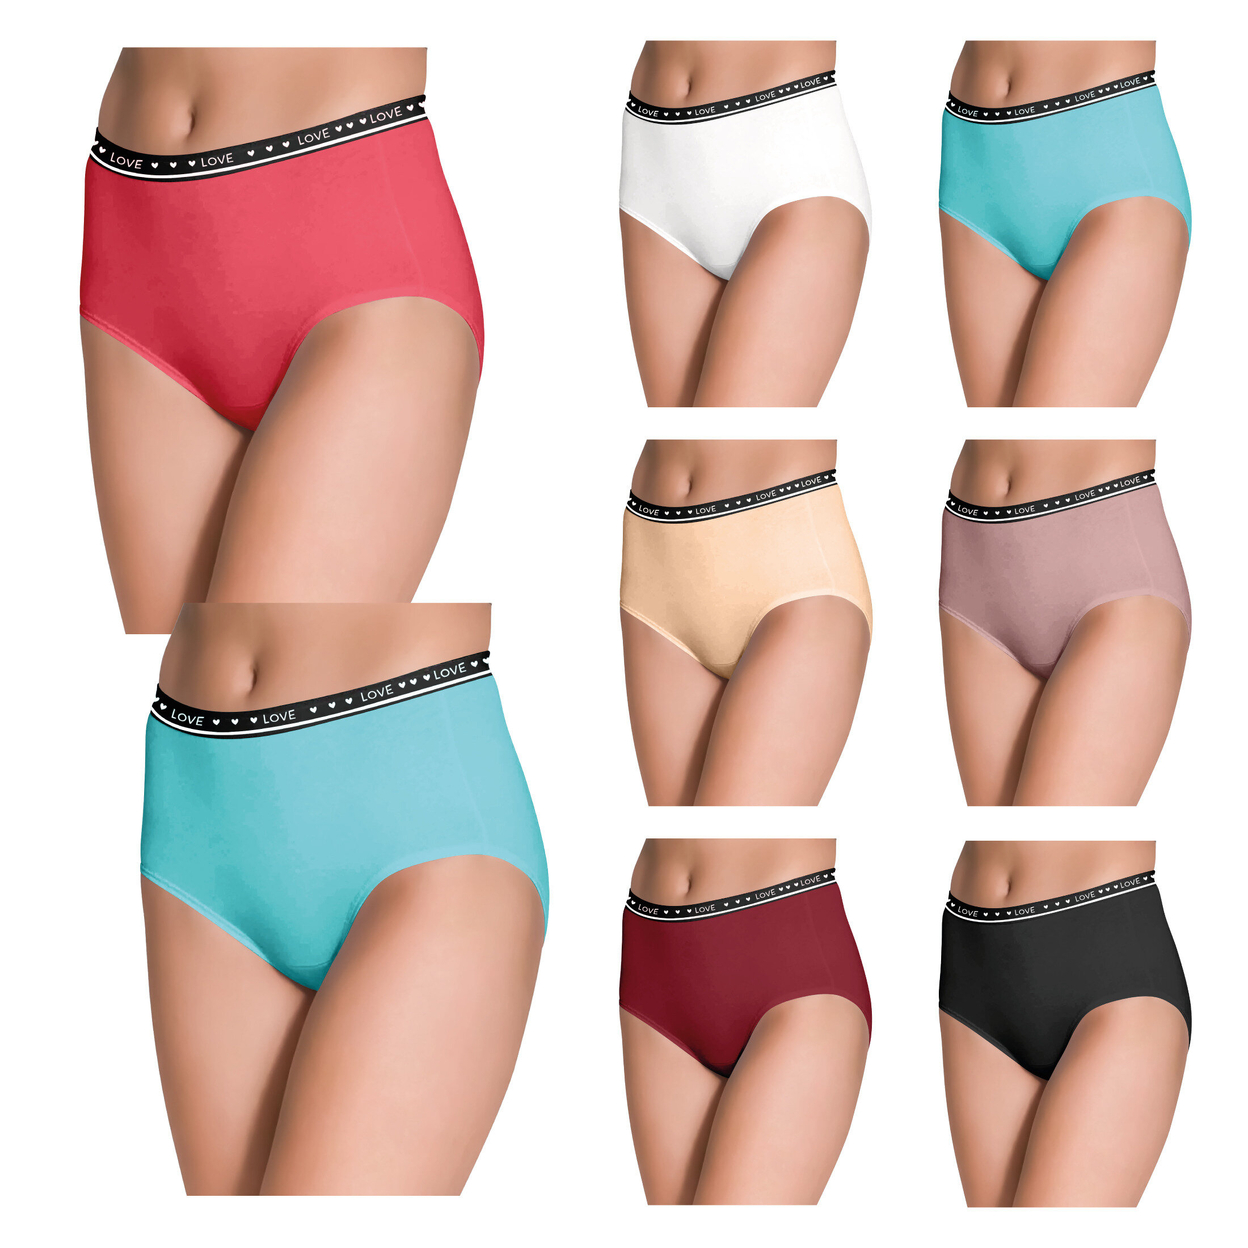 Multi-Pack: Women's Ultra Soft Moisture Wicking Panties Cotton Perfect Fit Underwear (Plus Sizes Available) - 12-Pack, Large